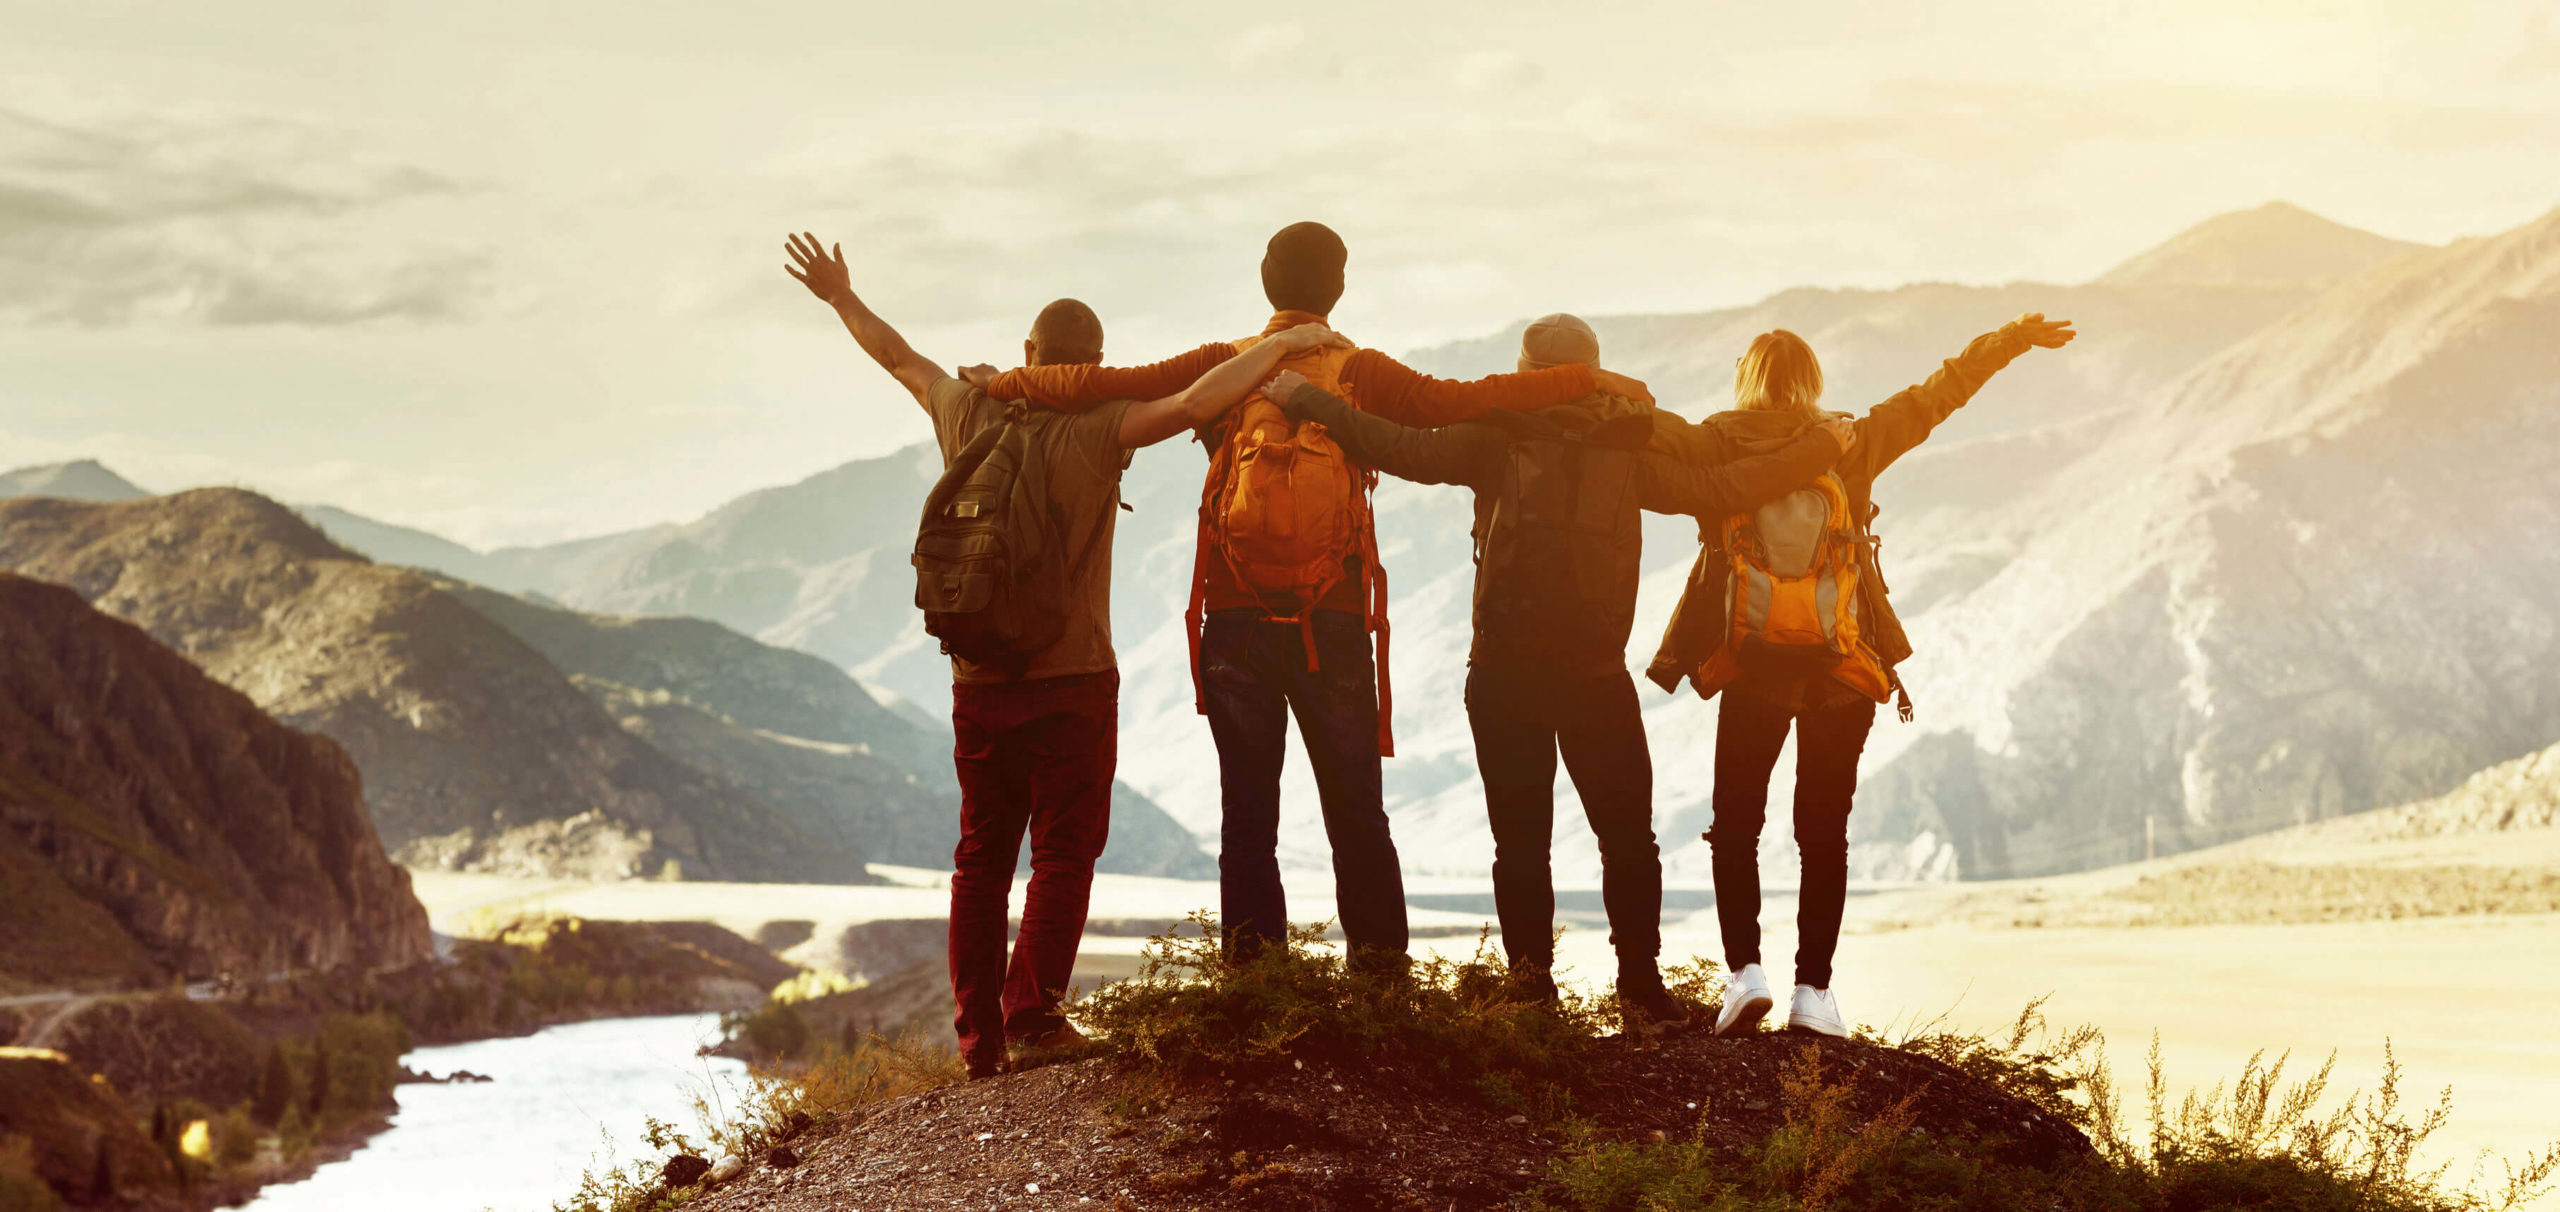 Group of people at top of mountain with arms raised